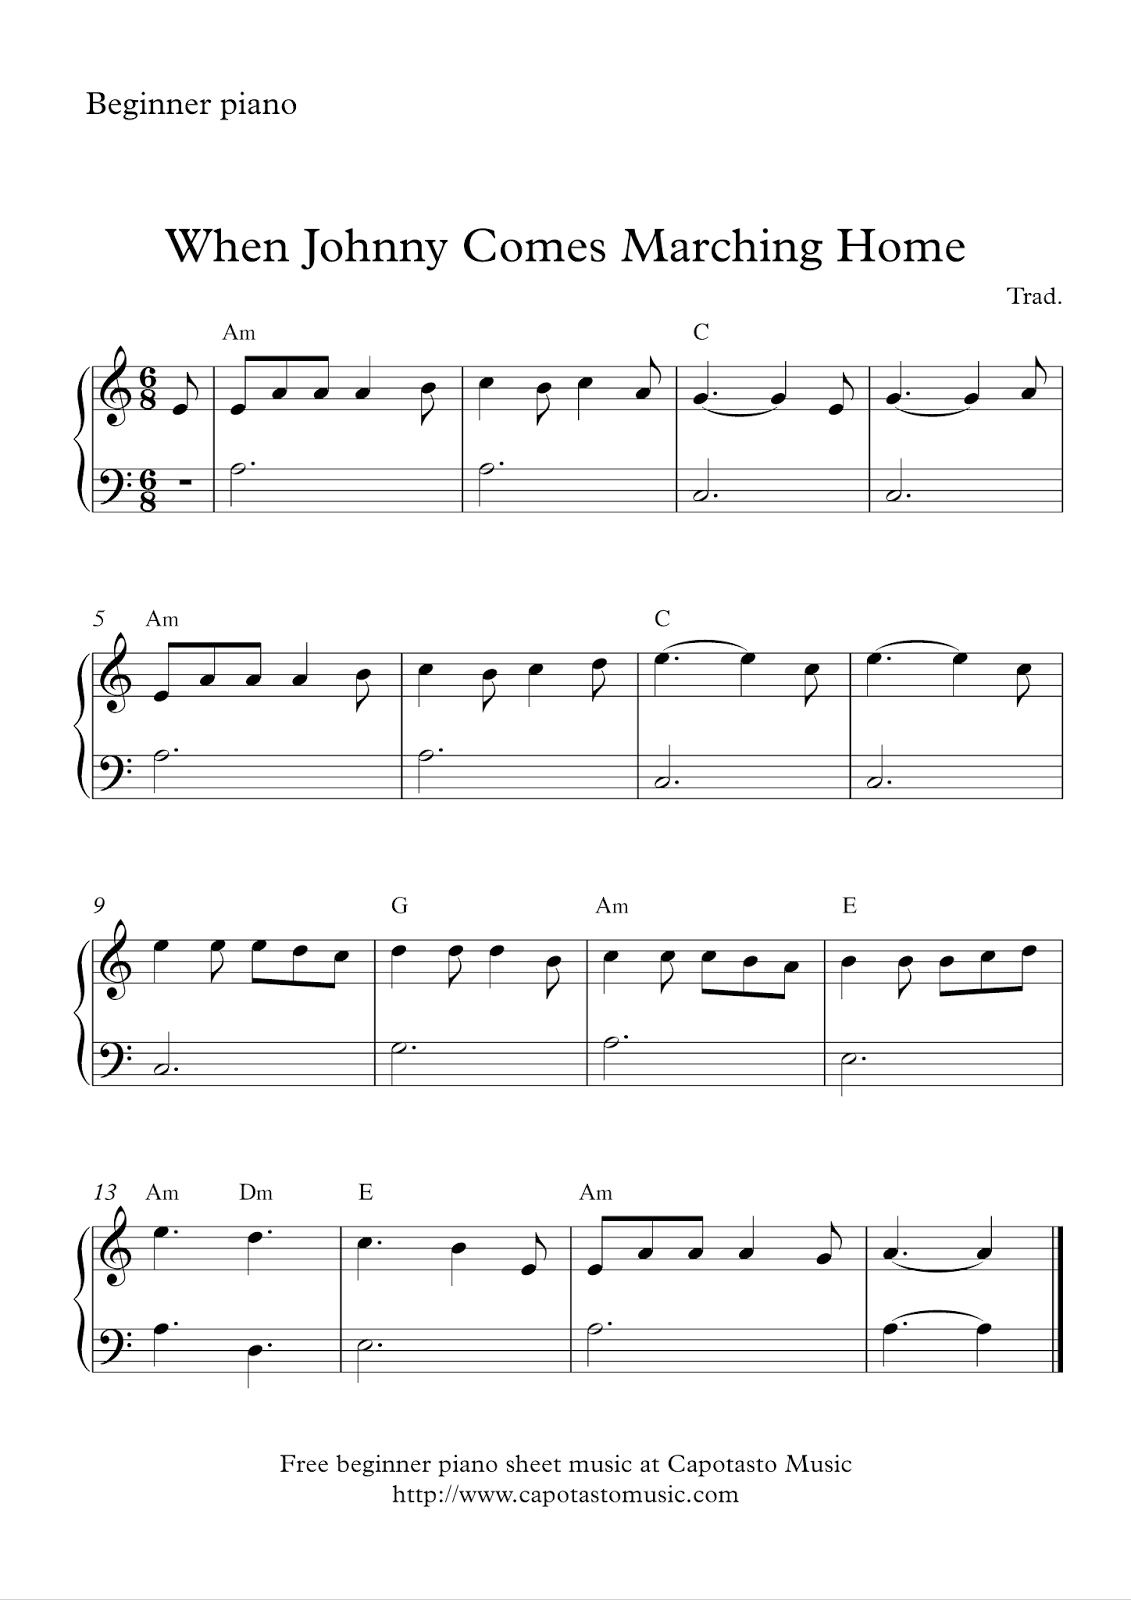 Free easy beginners piano sheet music - When Johnny Comes Marching Home